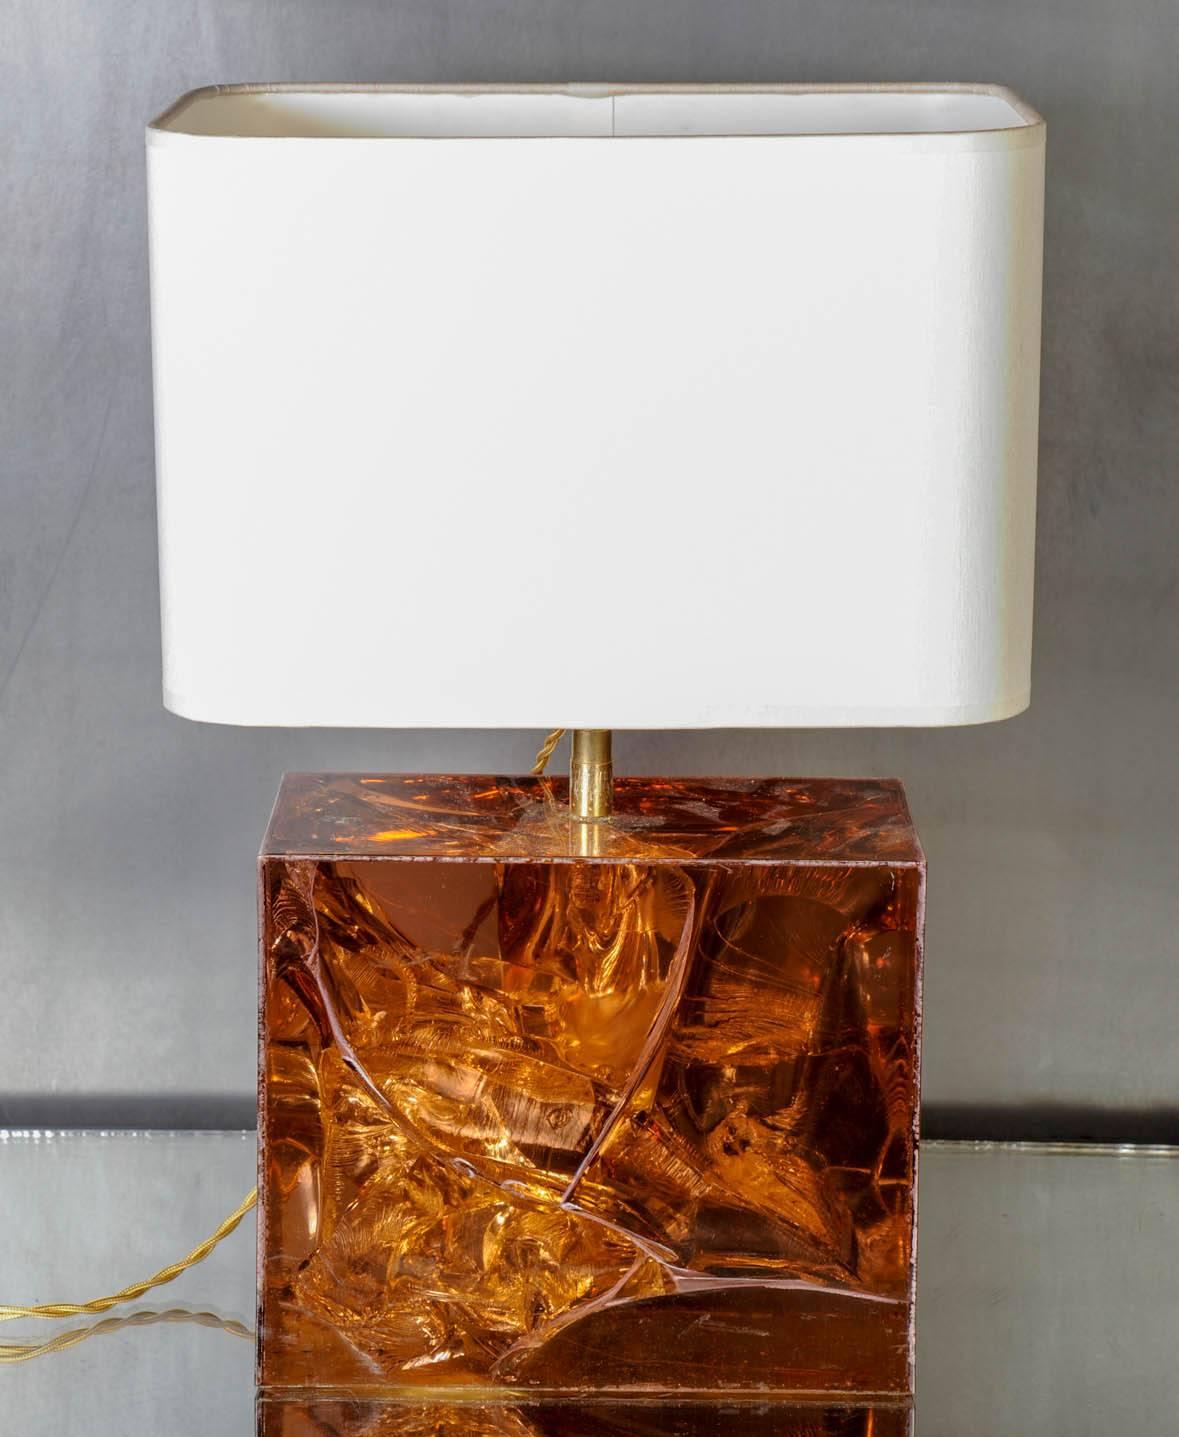 Nice brick shaped table lamp made of a resin fractal block in an amber and earthy tones and new brass neck.

Original sticker from the manufacturer under the lamps: 
